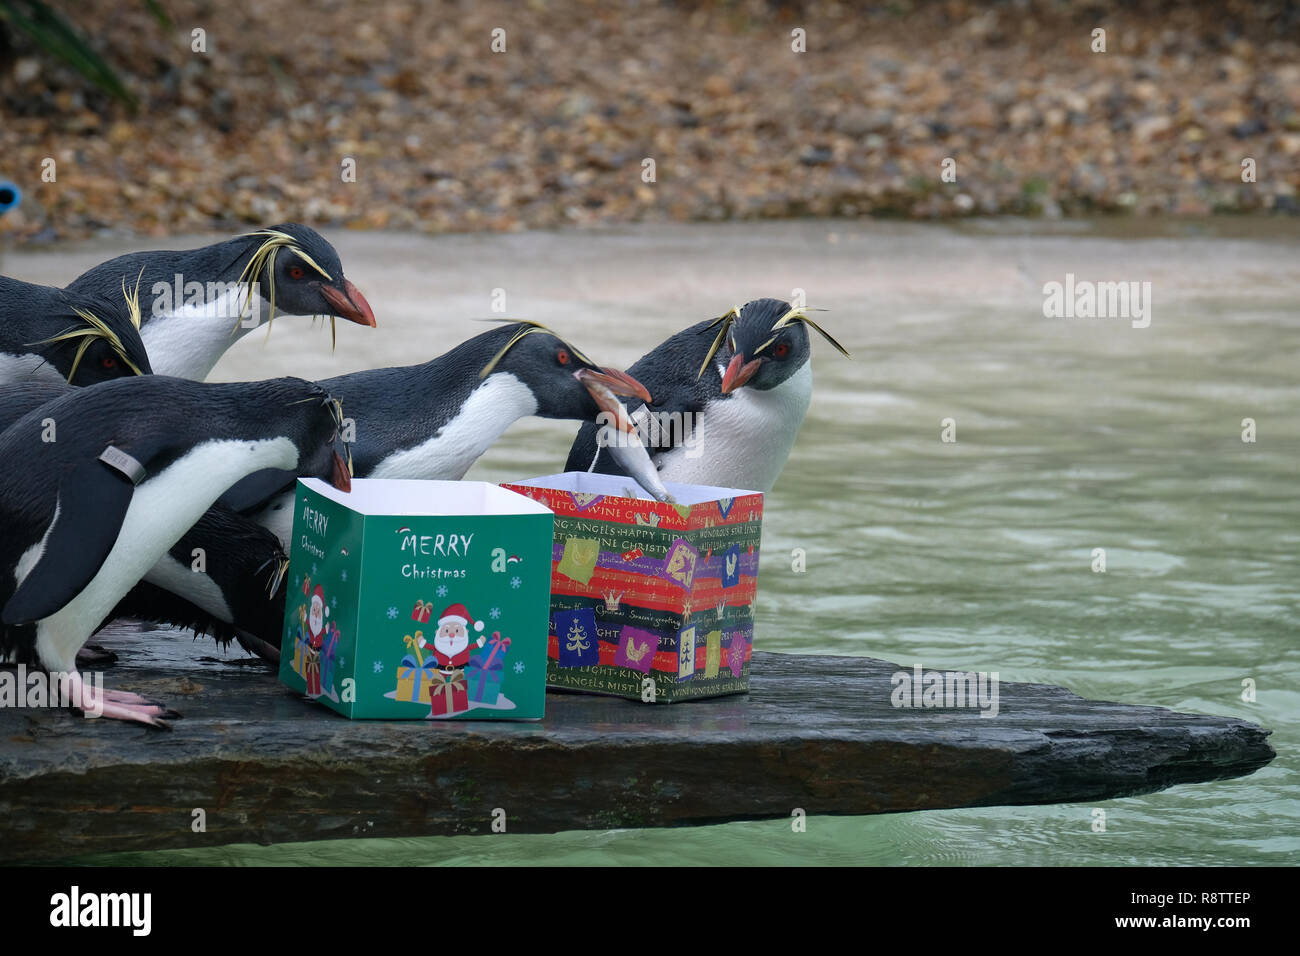 ZSL Whipsnade: Bedfordshire. UK 18th December 2018. Rockhopper penguins getting an early Christmas present of their favourite fish 'credit Stuart Rose/Alamy Live News' Stock Photo